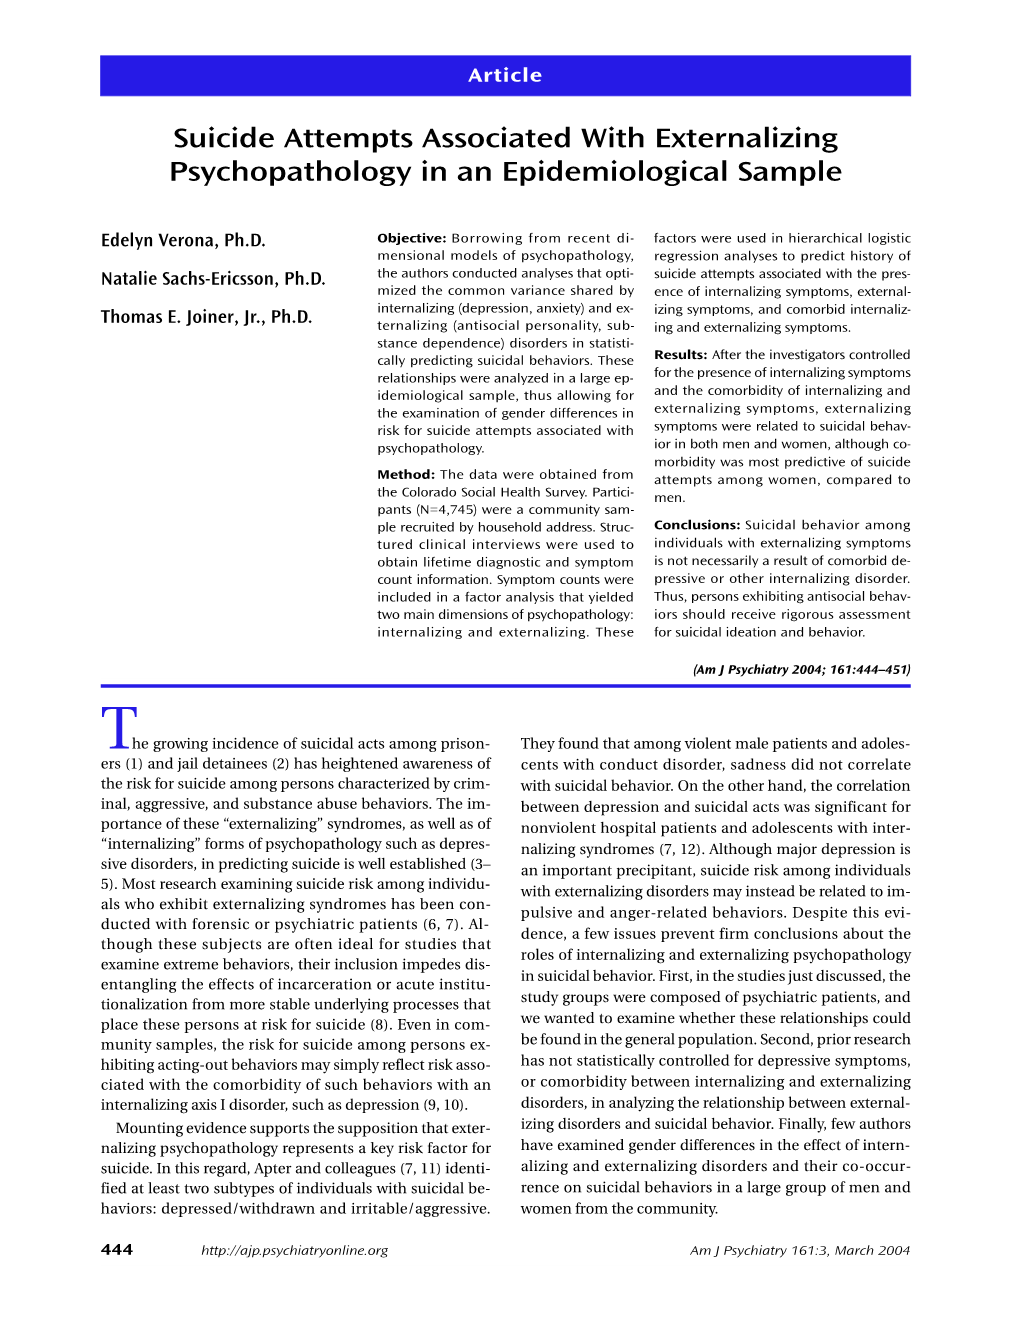 Suicide Attempts Associated with Externalizing Psychopathology in an Epidemiological Sample